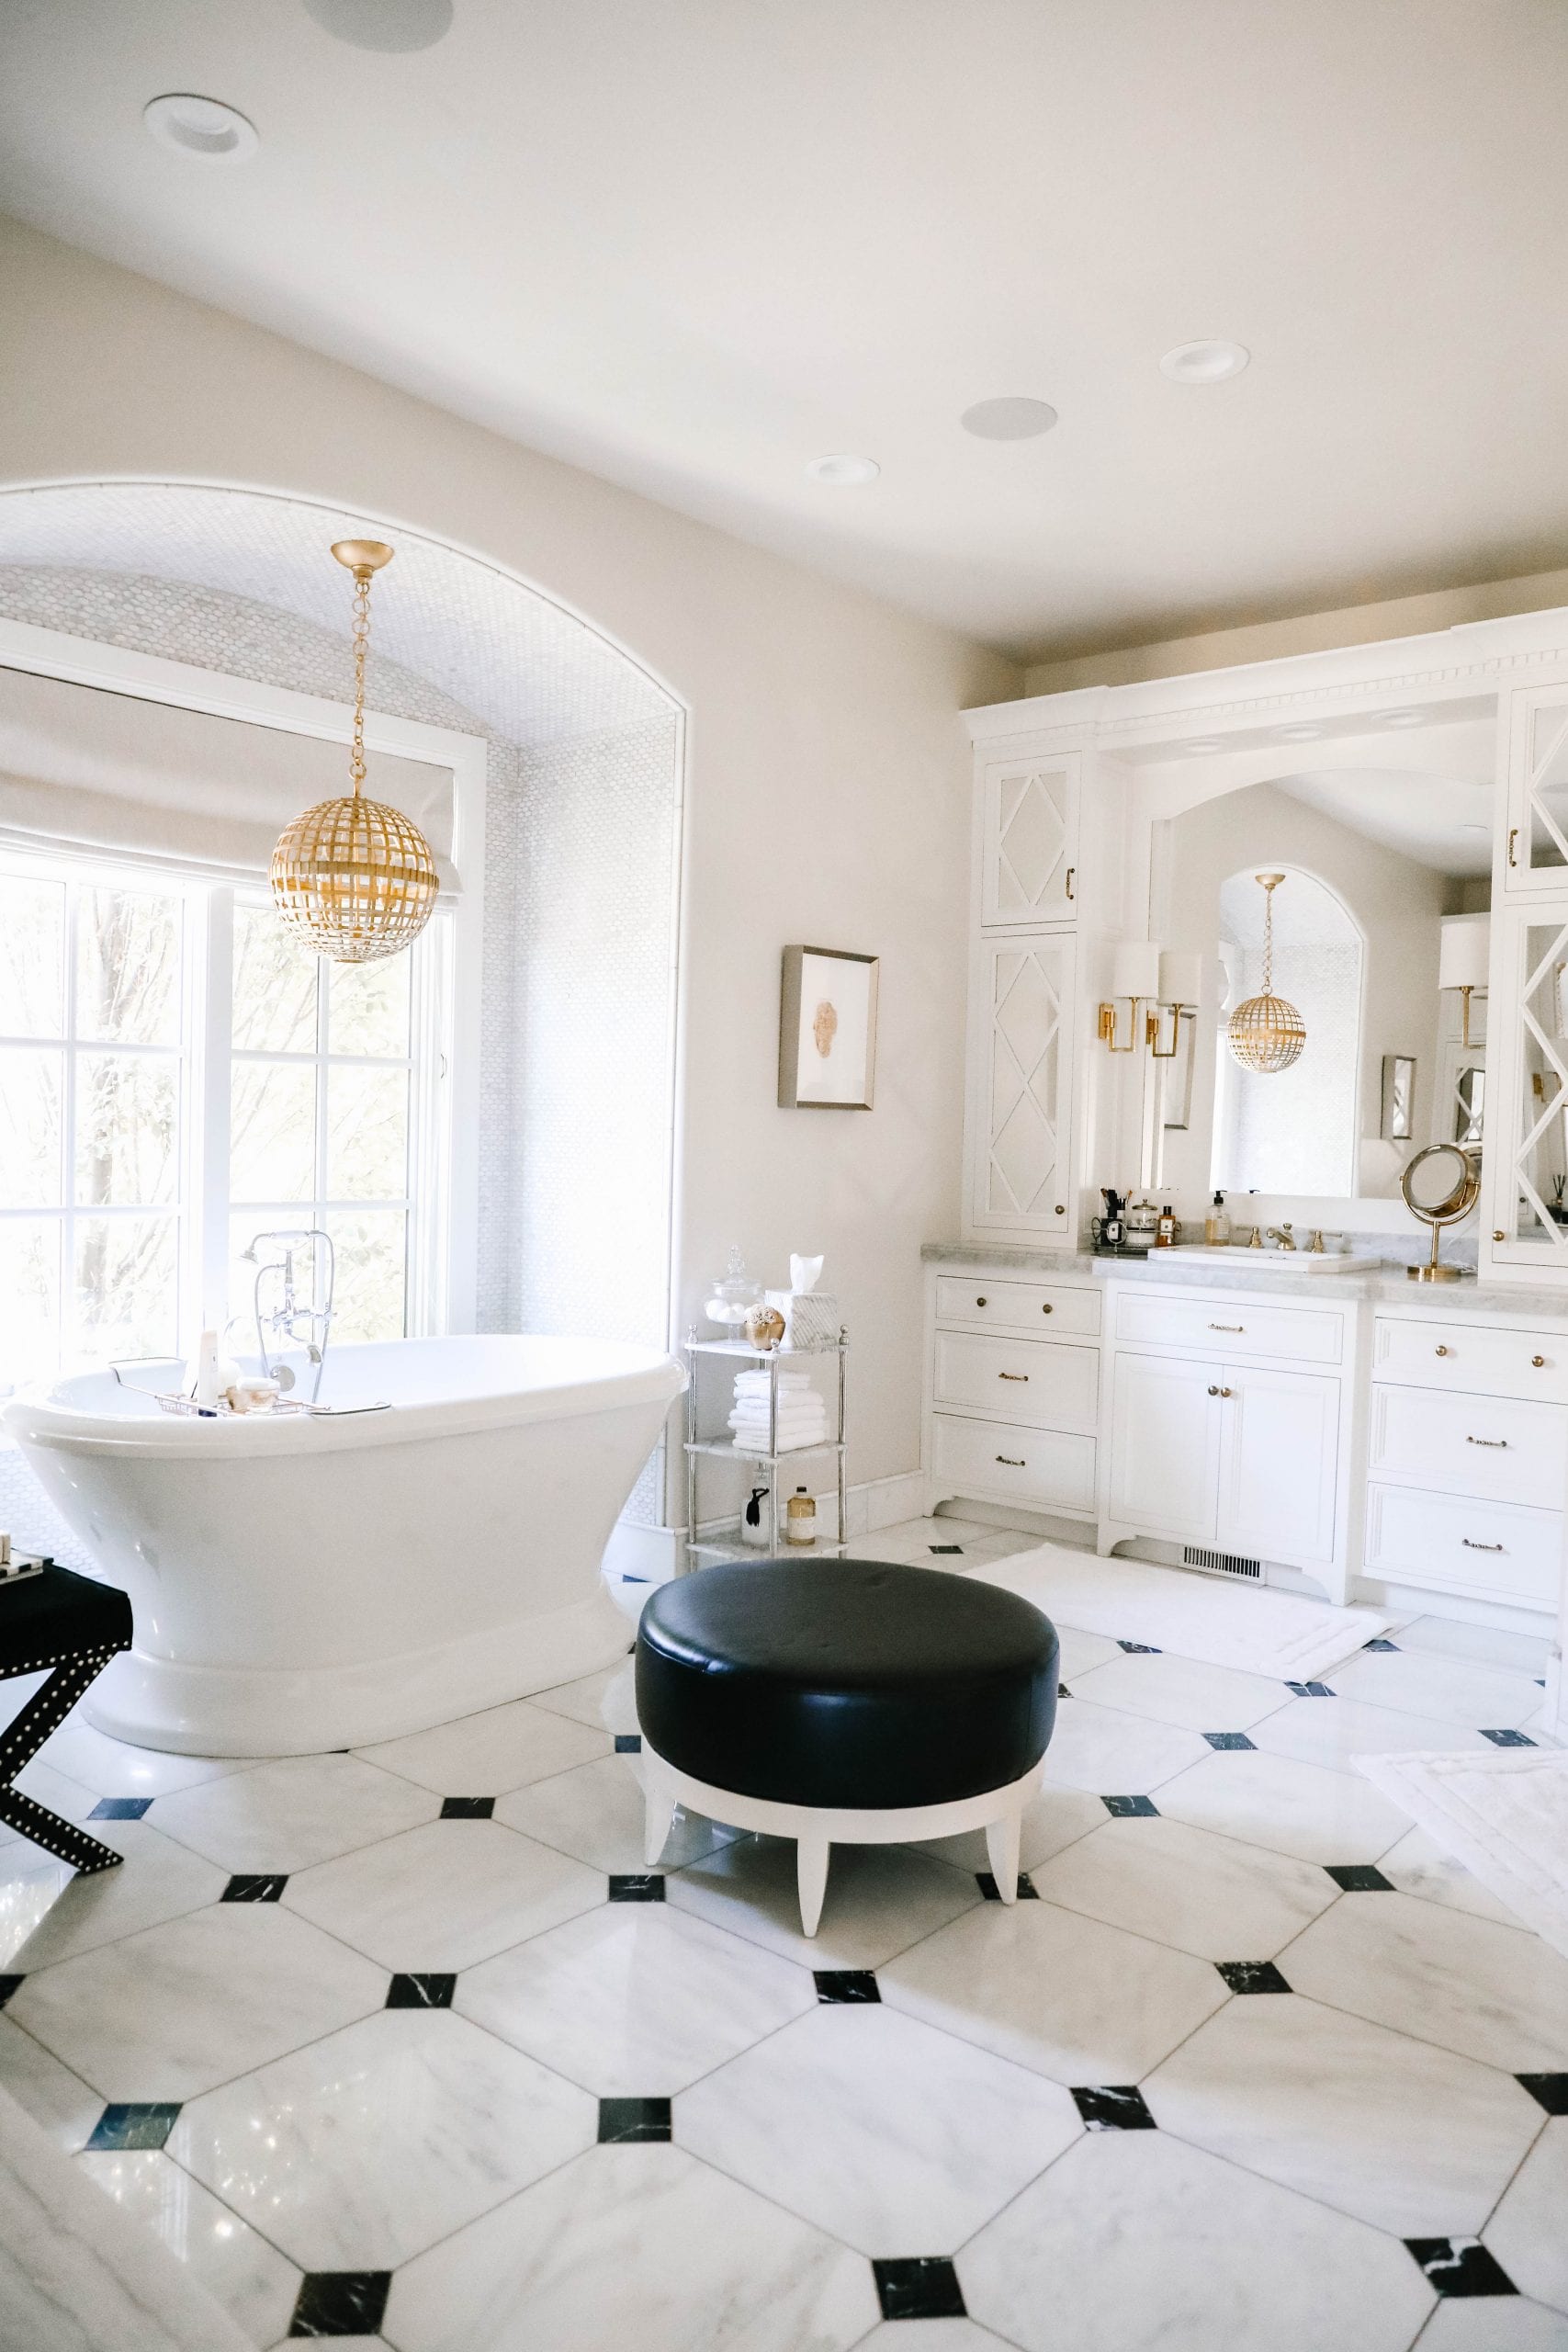 Spring is the perfect time to refresh your master bathroom. See how I made a few simple changes to the master bathroom for a fresh new look.